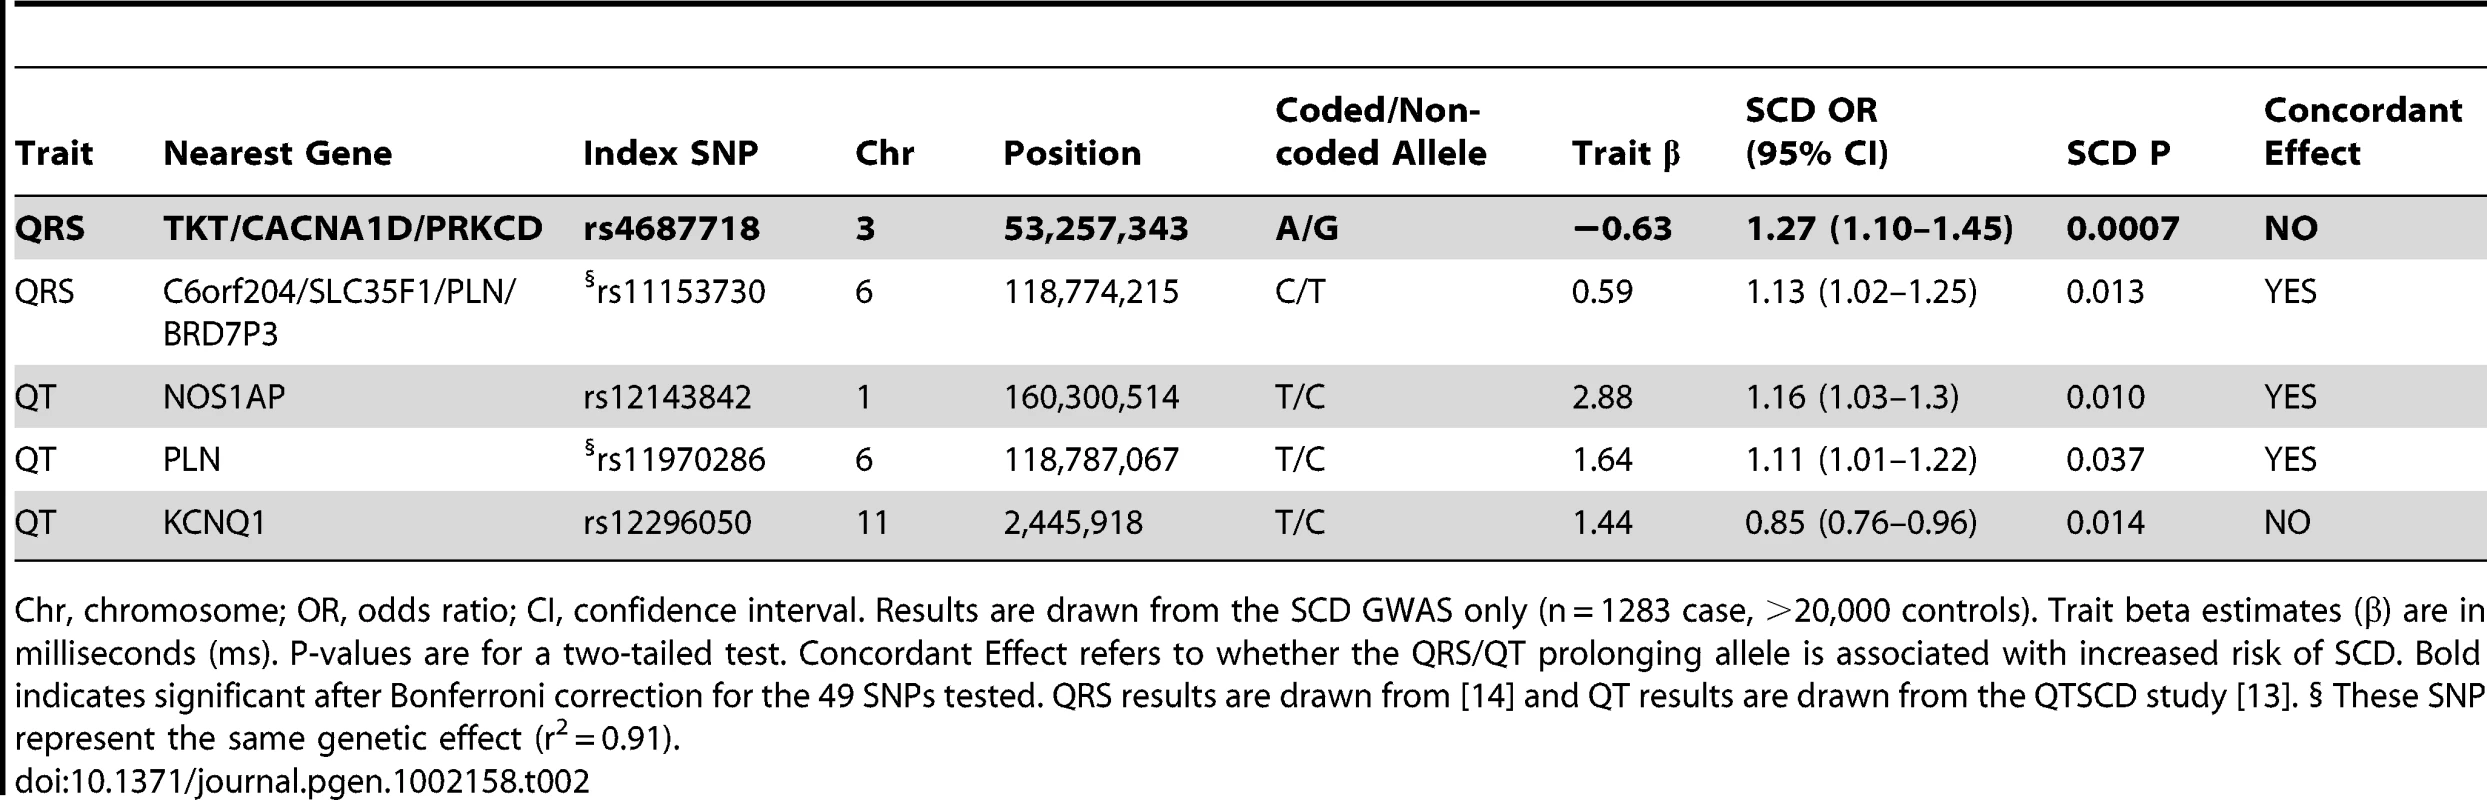 Association of QRS/QT interval associated SNPs with SCD.